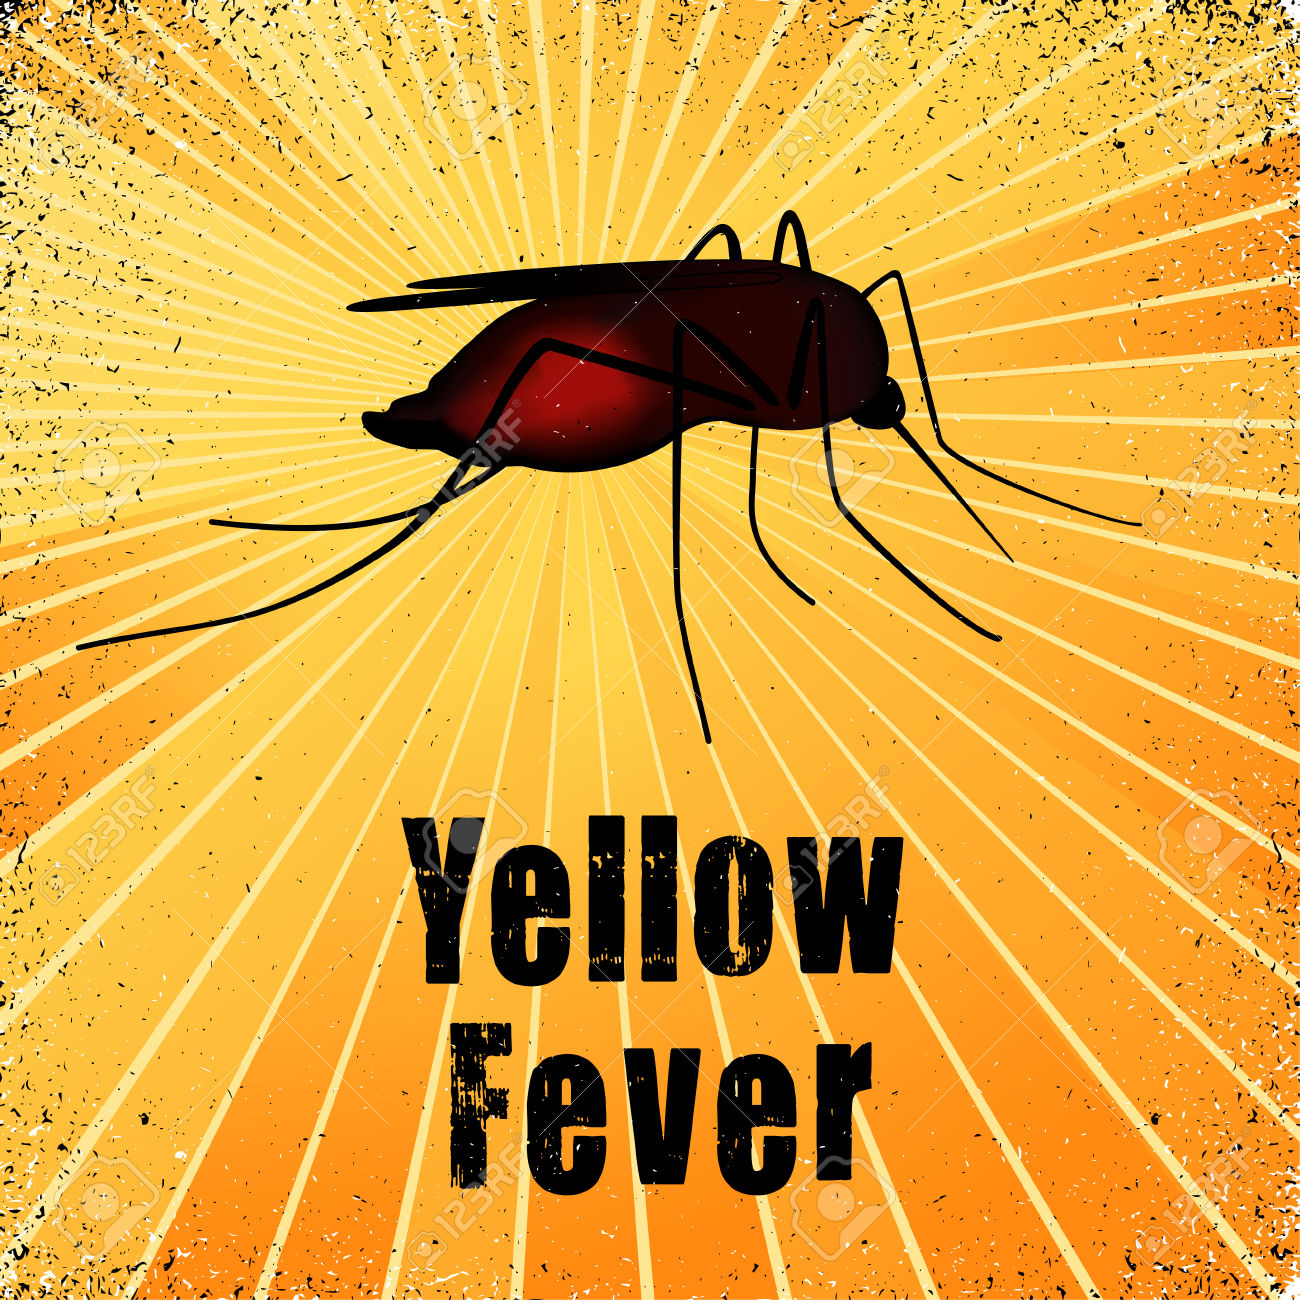 Yellow Fever in Brazil (update) 9/3/17 - Global Health Travel Clinic